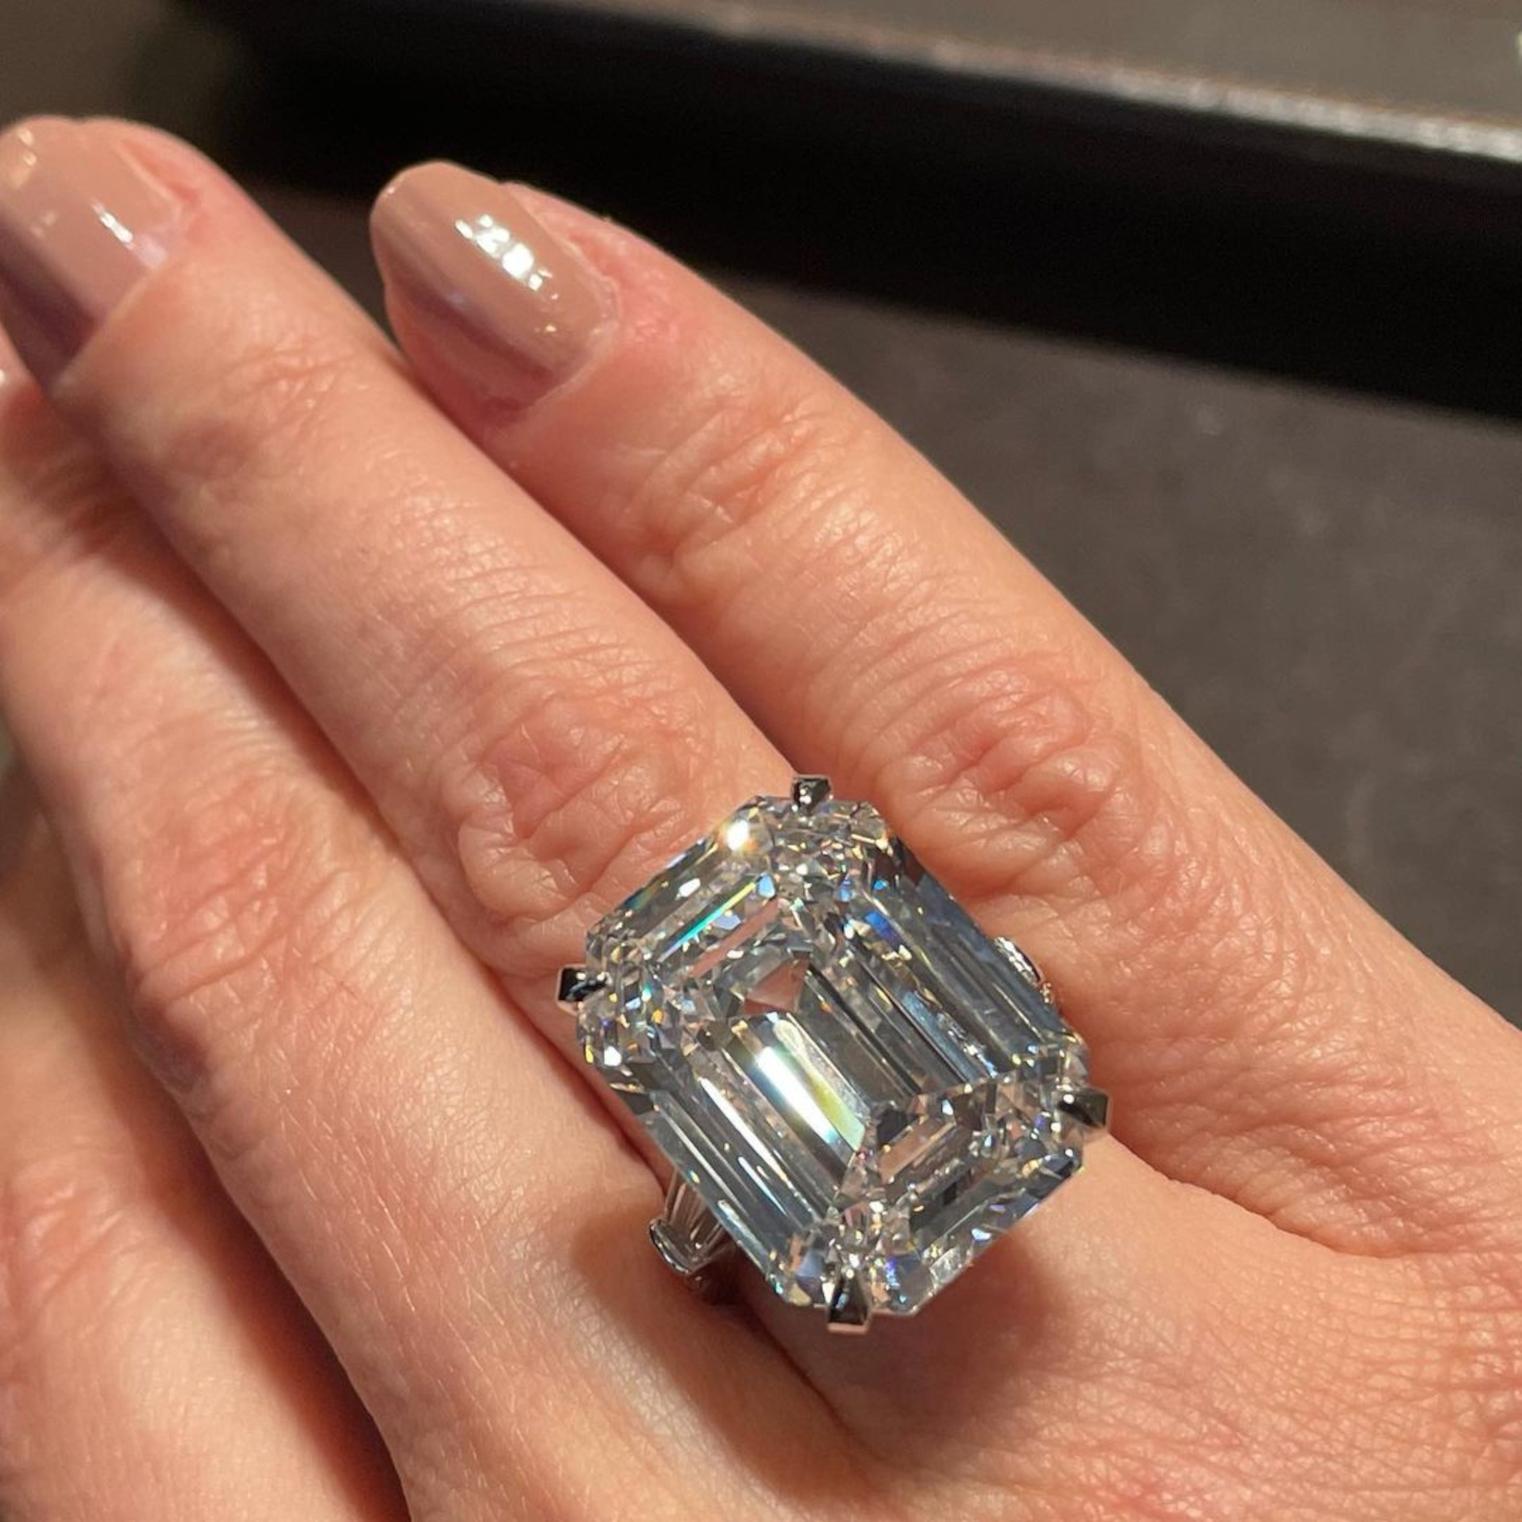 A exceptional ring with an investment grade emerald cut diamond.
The diamond, certified by GIA, is graded D in color and flawless in clarity; according to its gemmological report this rare diamond is type IIA.